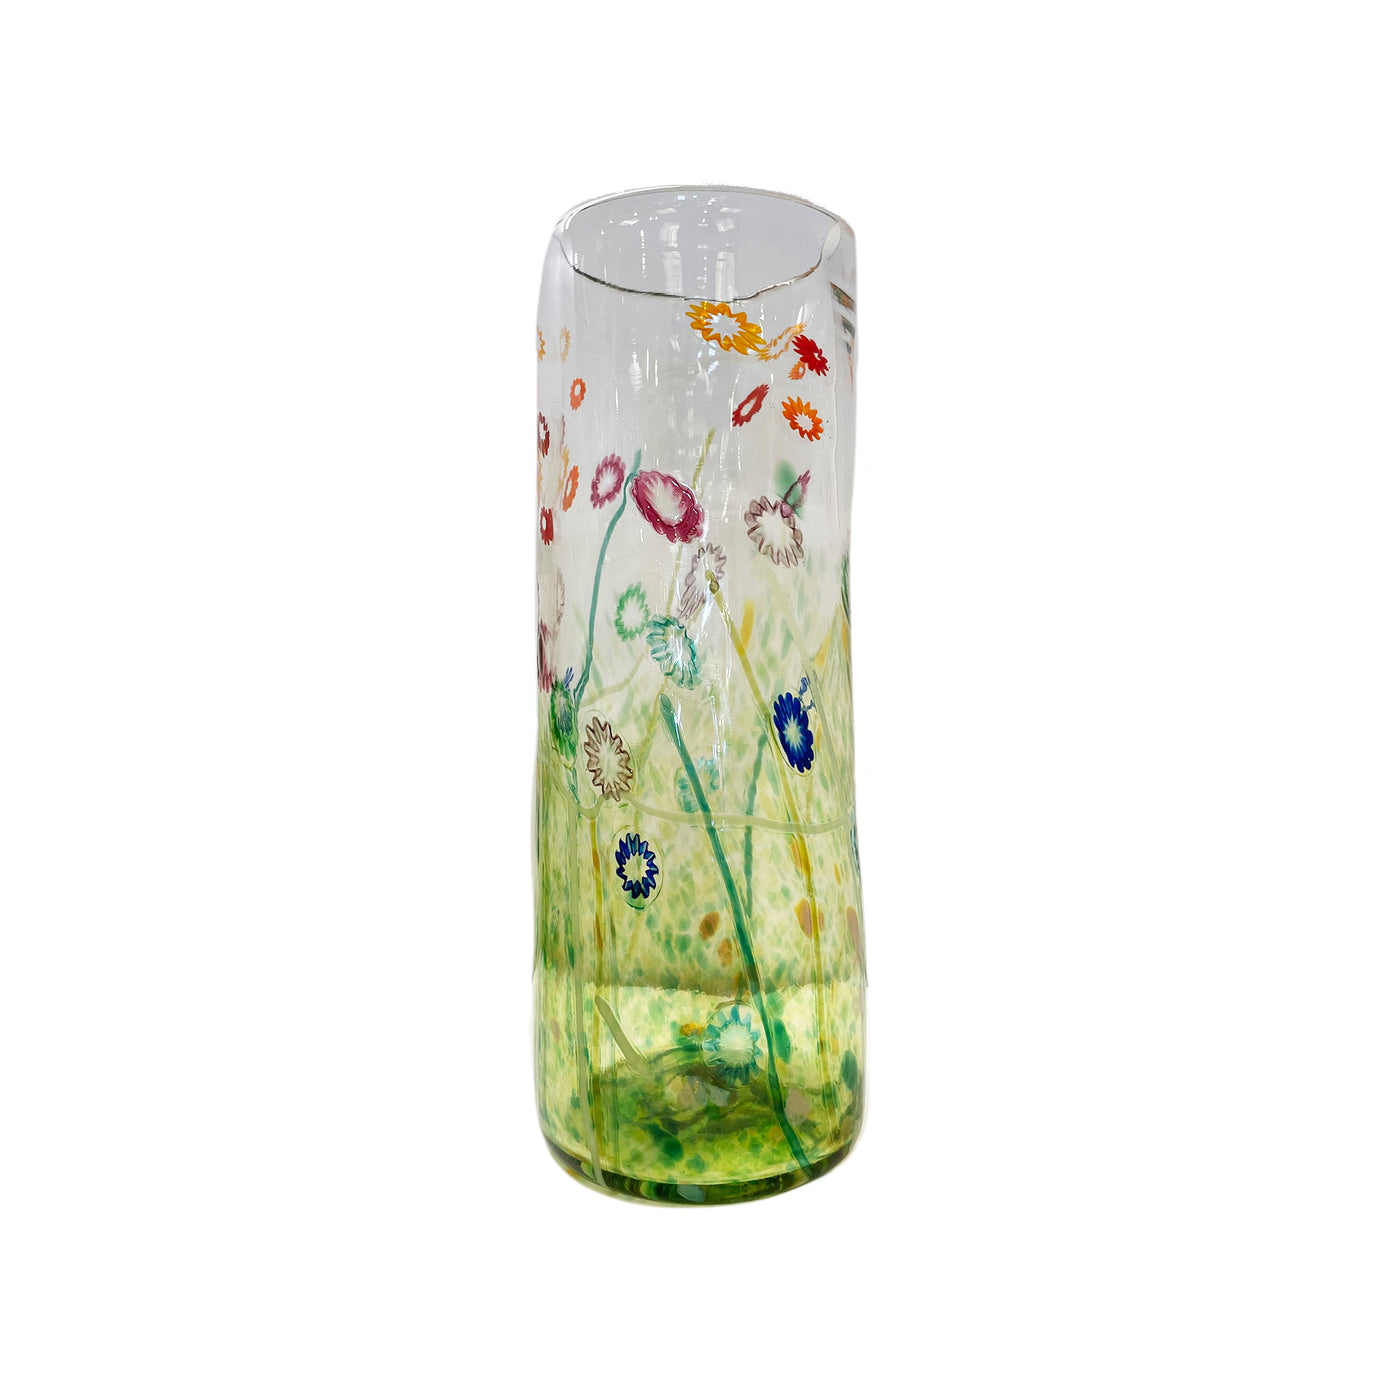 Monet Tall Floral Vase by Stover Glass | Julia Moss Designs